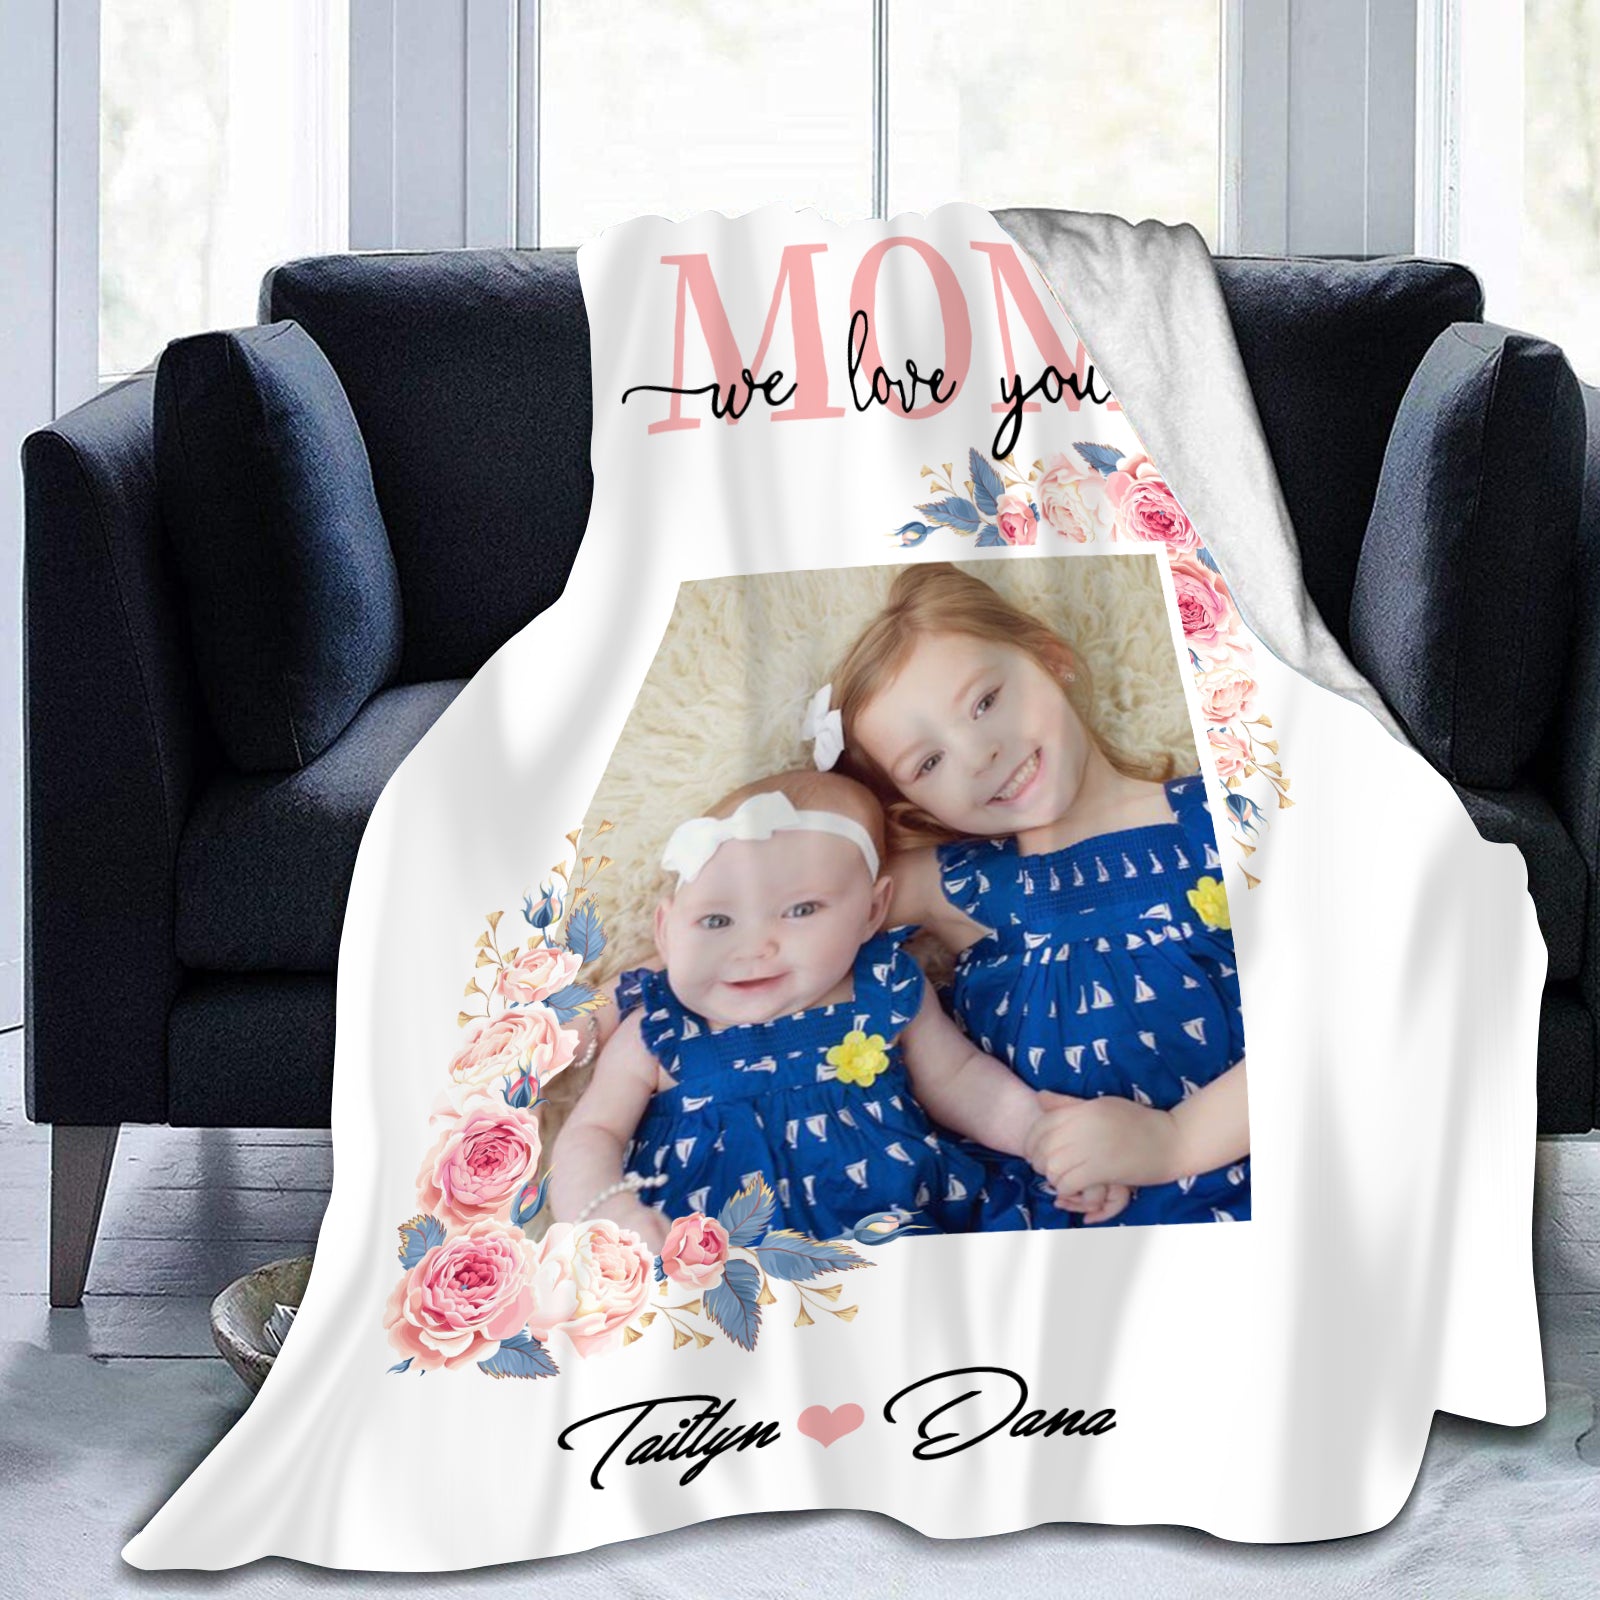 Personalized "MOM we love you" blanket - perfect gift to warm her heart on any occasion. - colorfulcustom